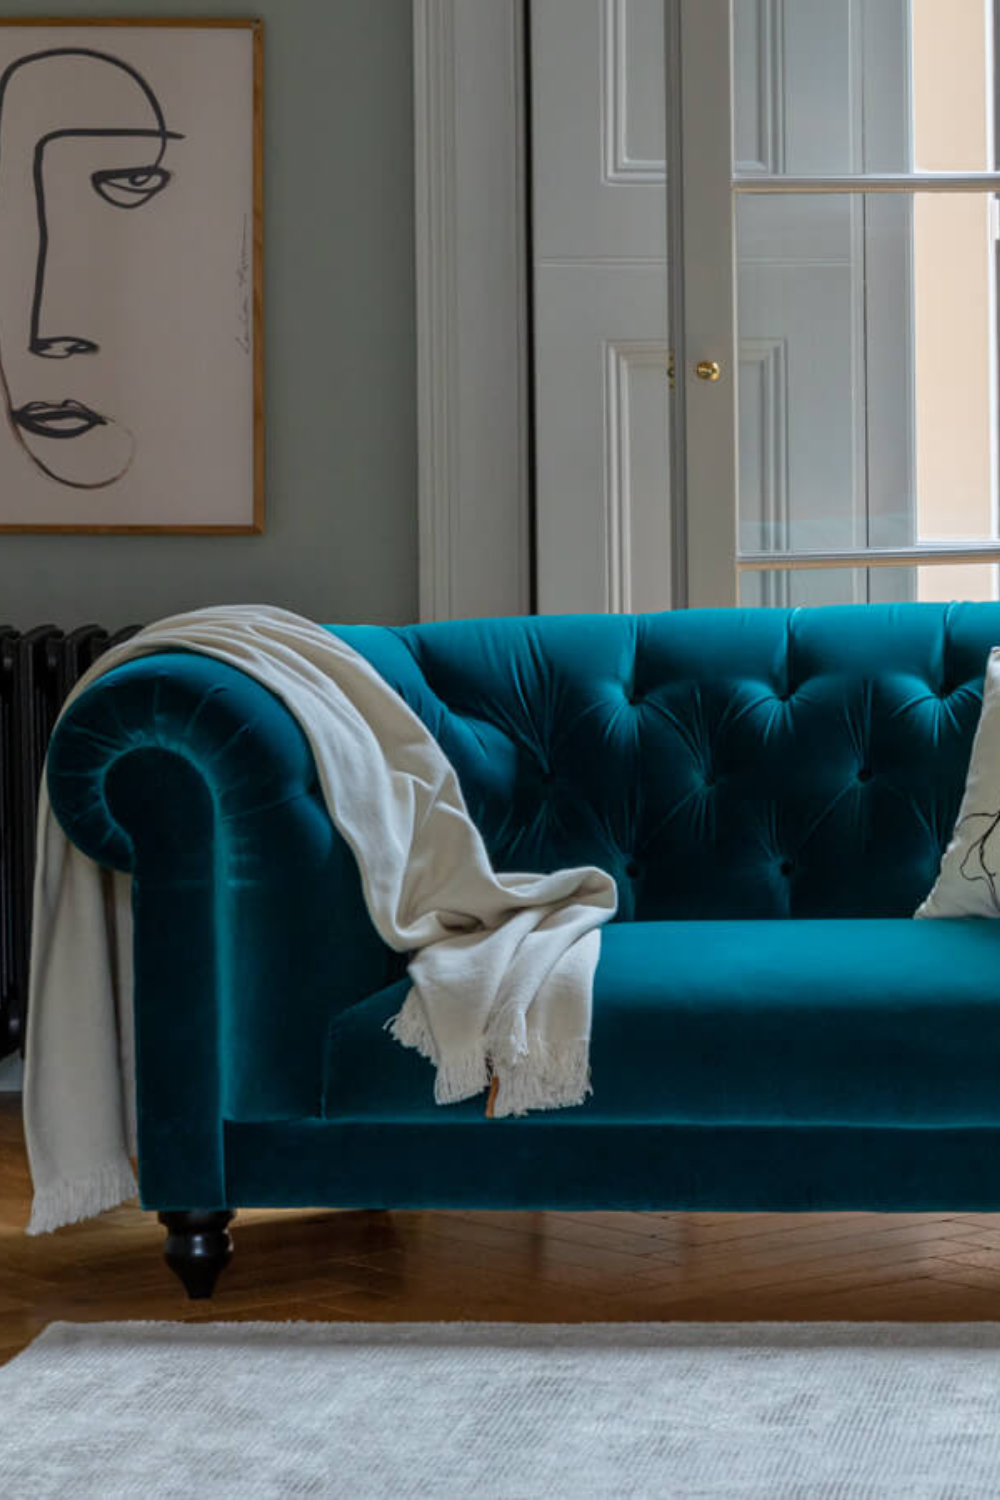 How sofa blue is best among a variety of
  colors